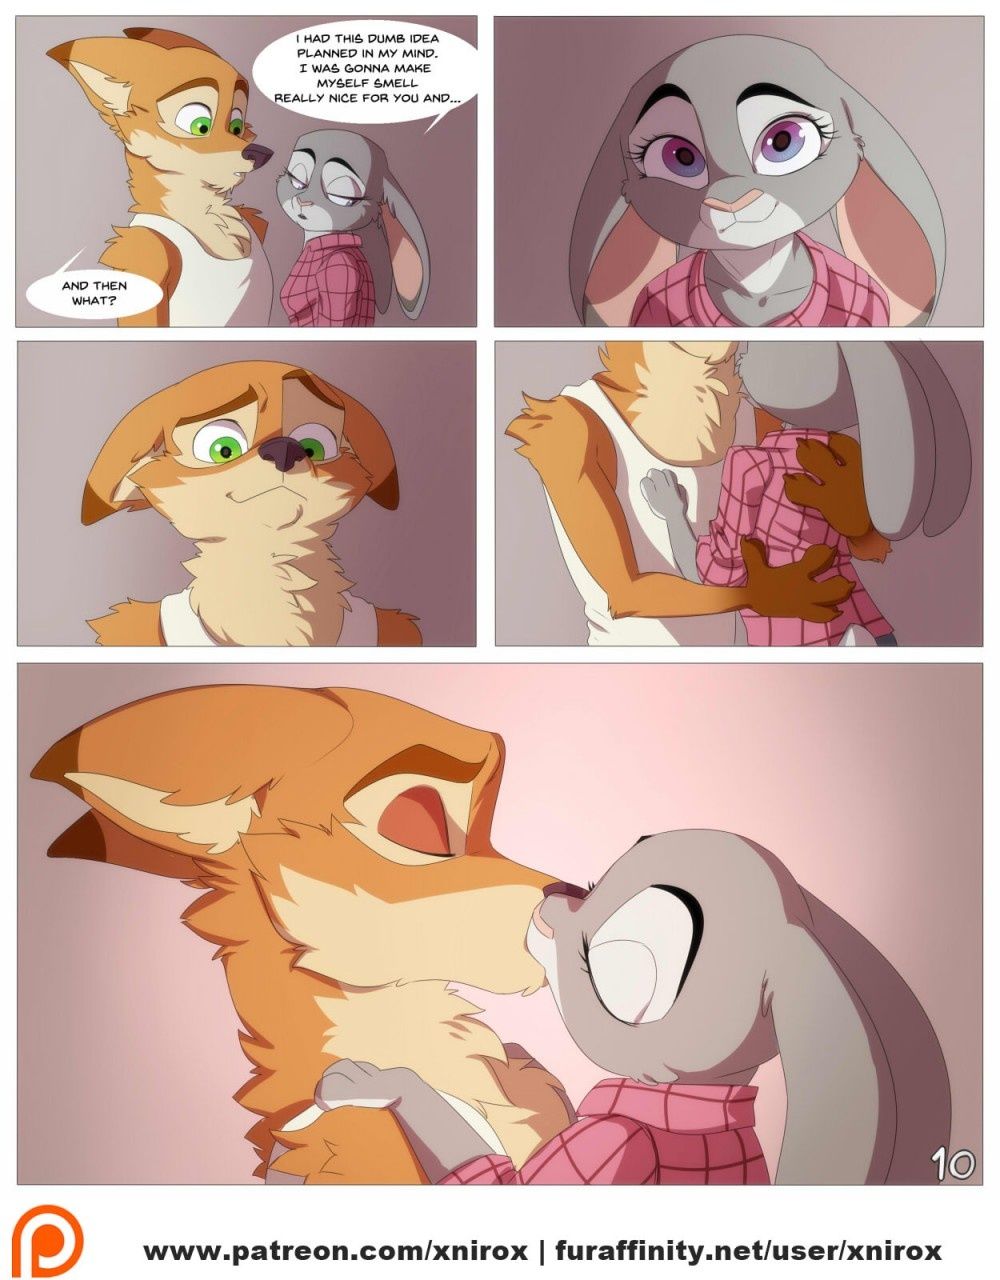 [Xnirox] Zootopia - Twitterpated, Furry Cartoon page 10